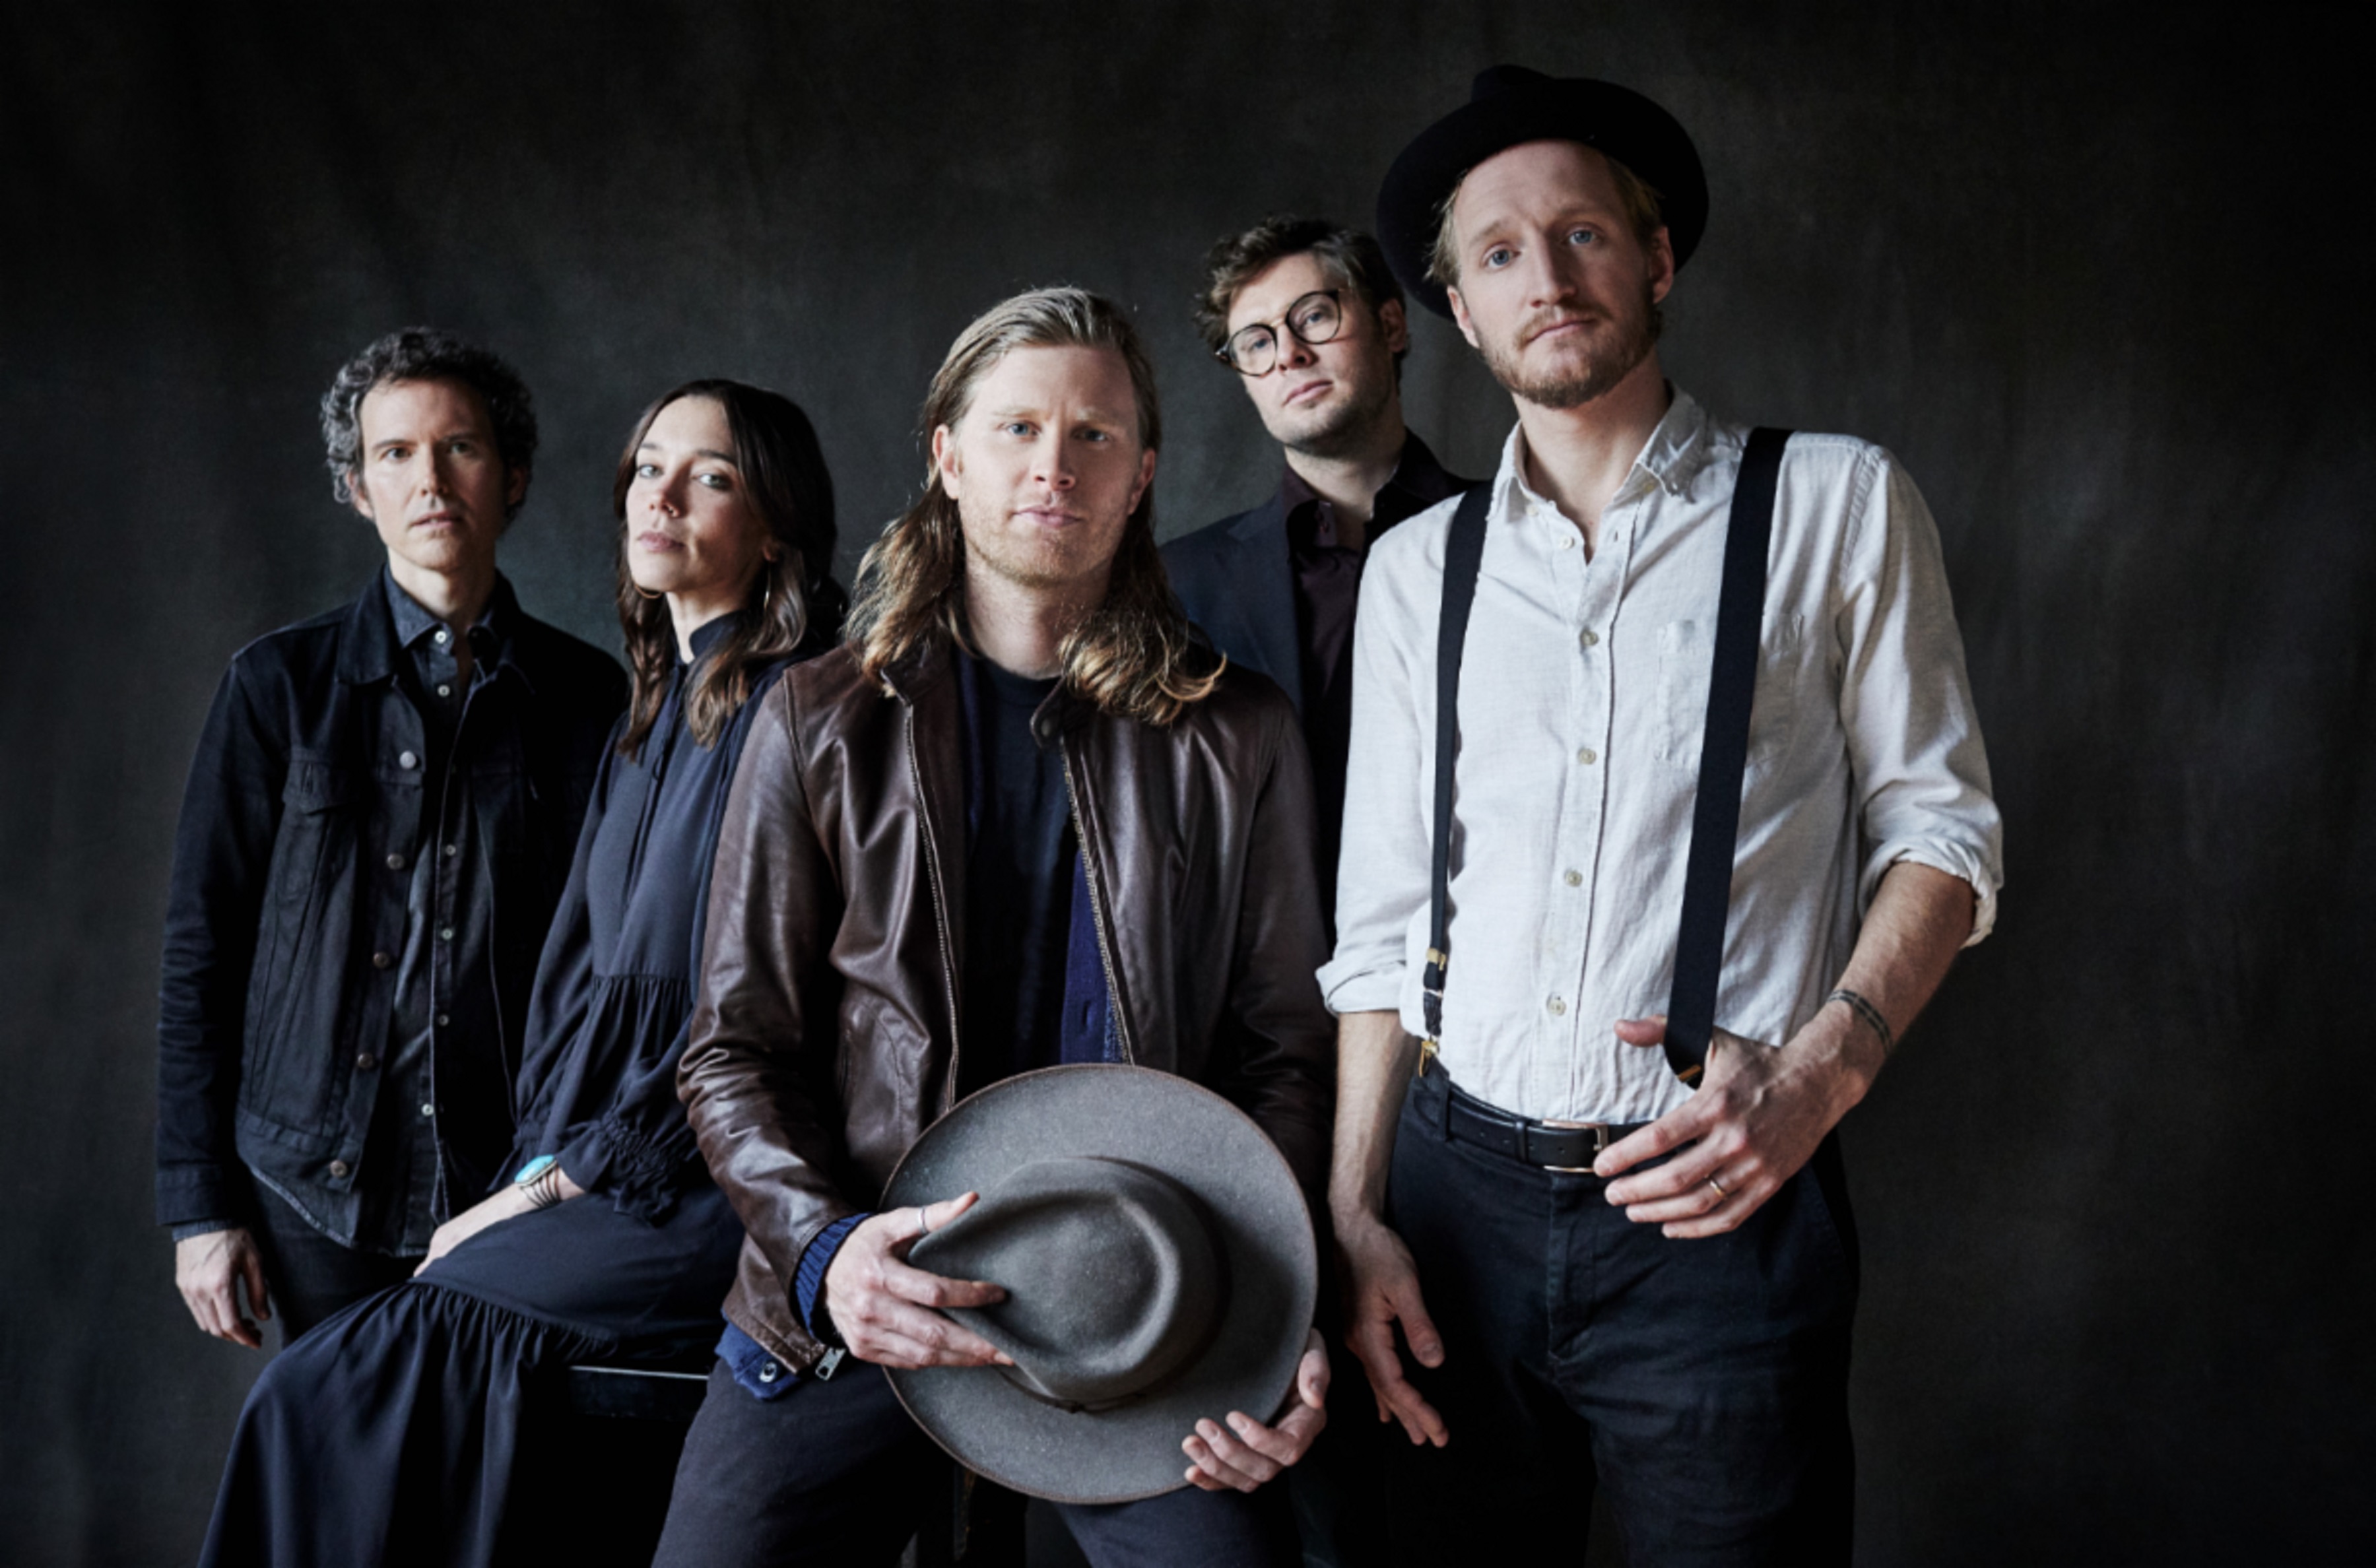 the-lumineers-thank-fans-for-helping-achieve-emissions-goals-and-affect